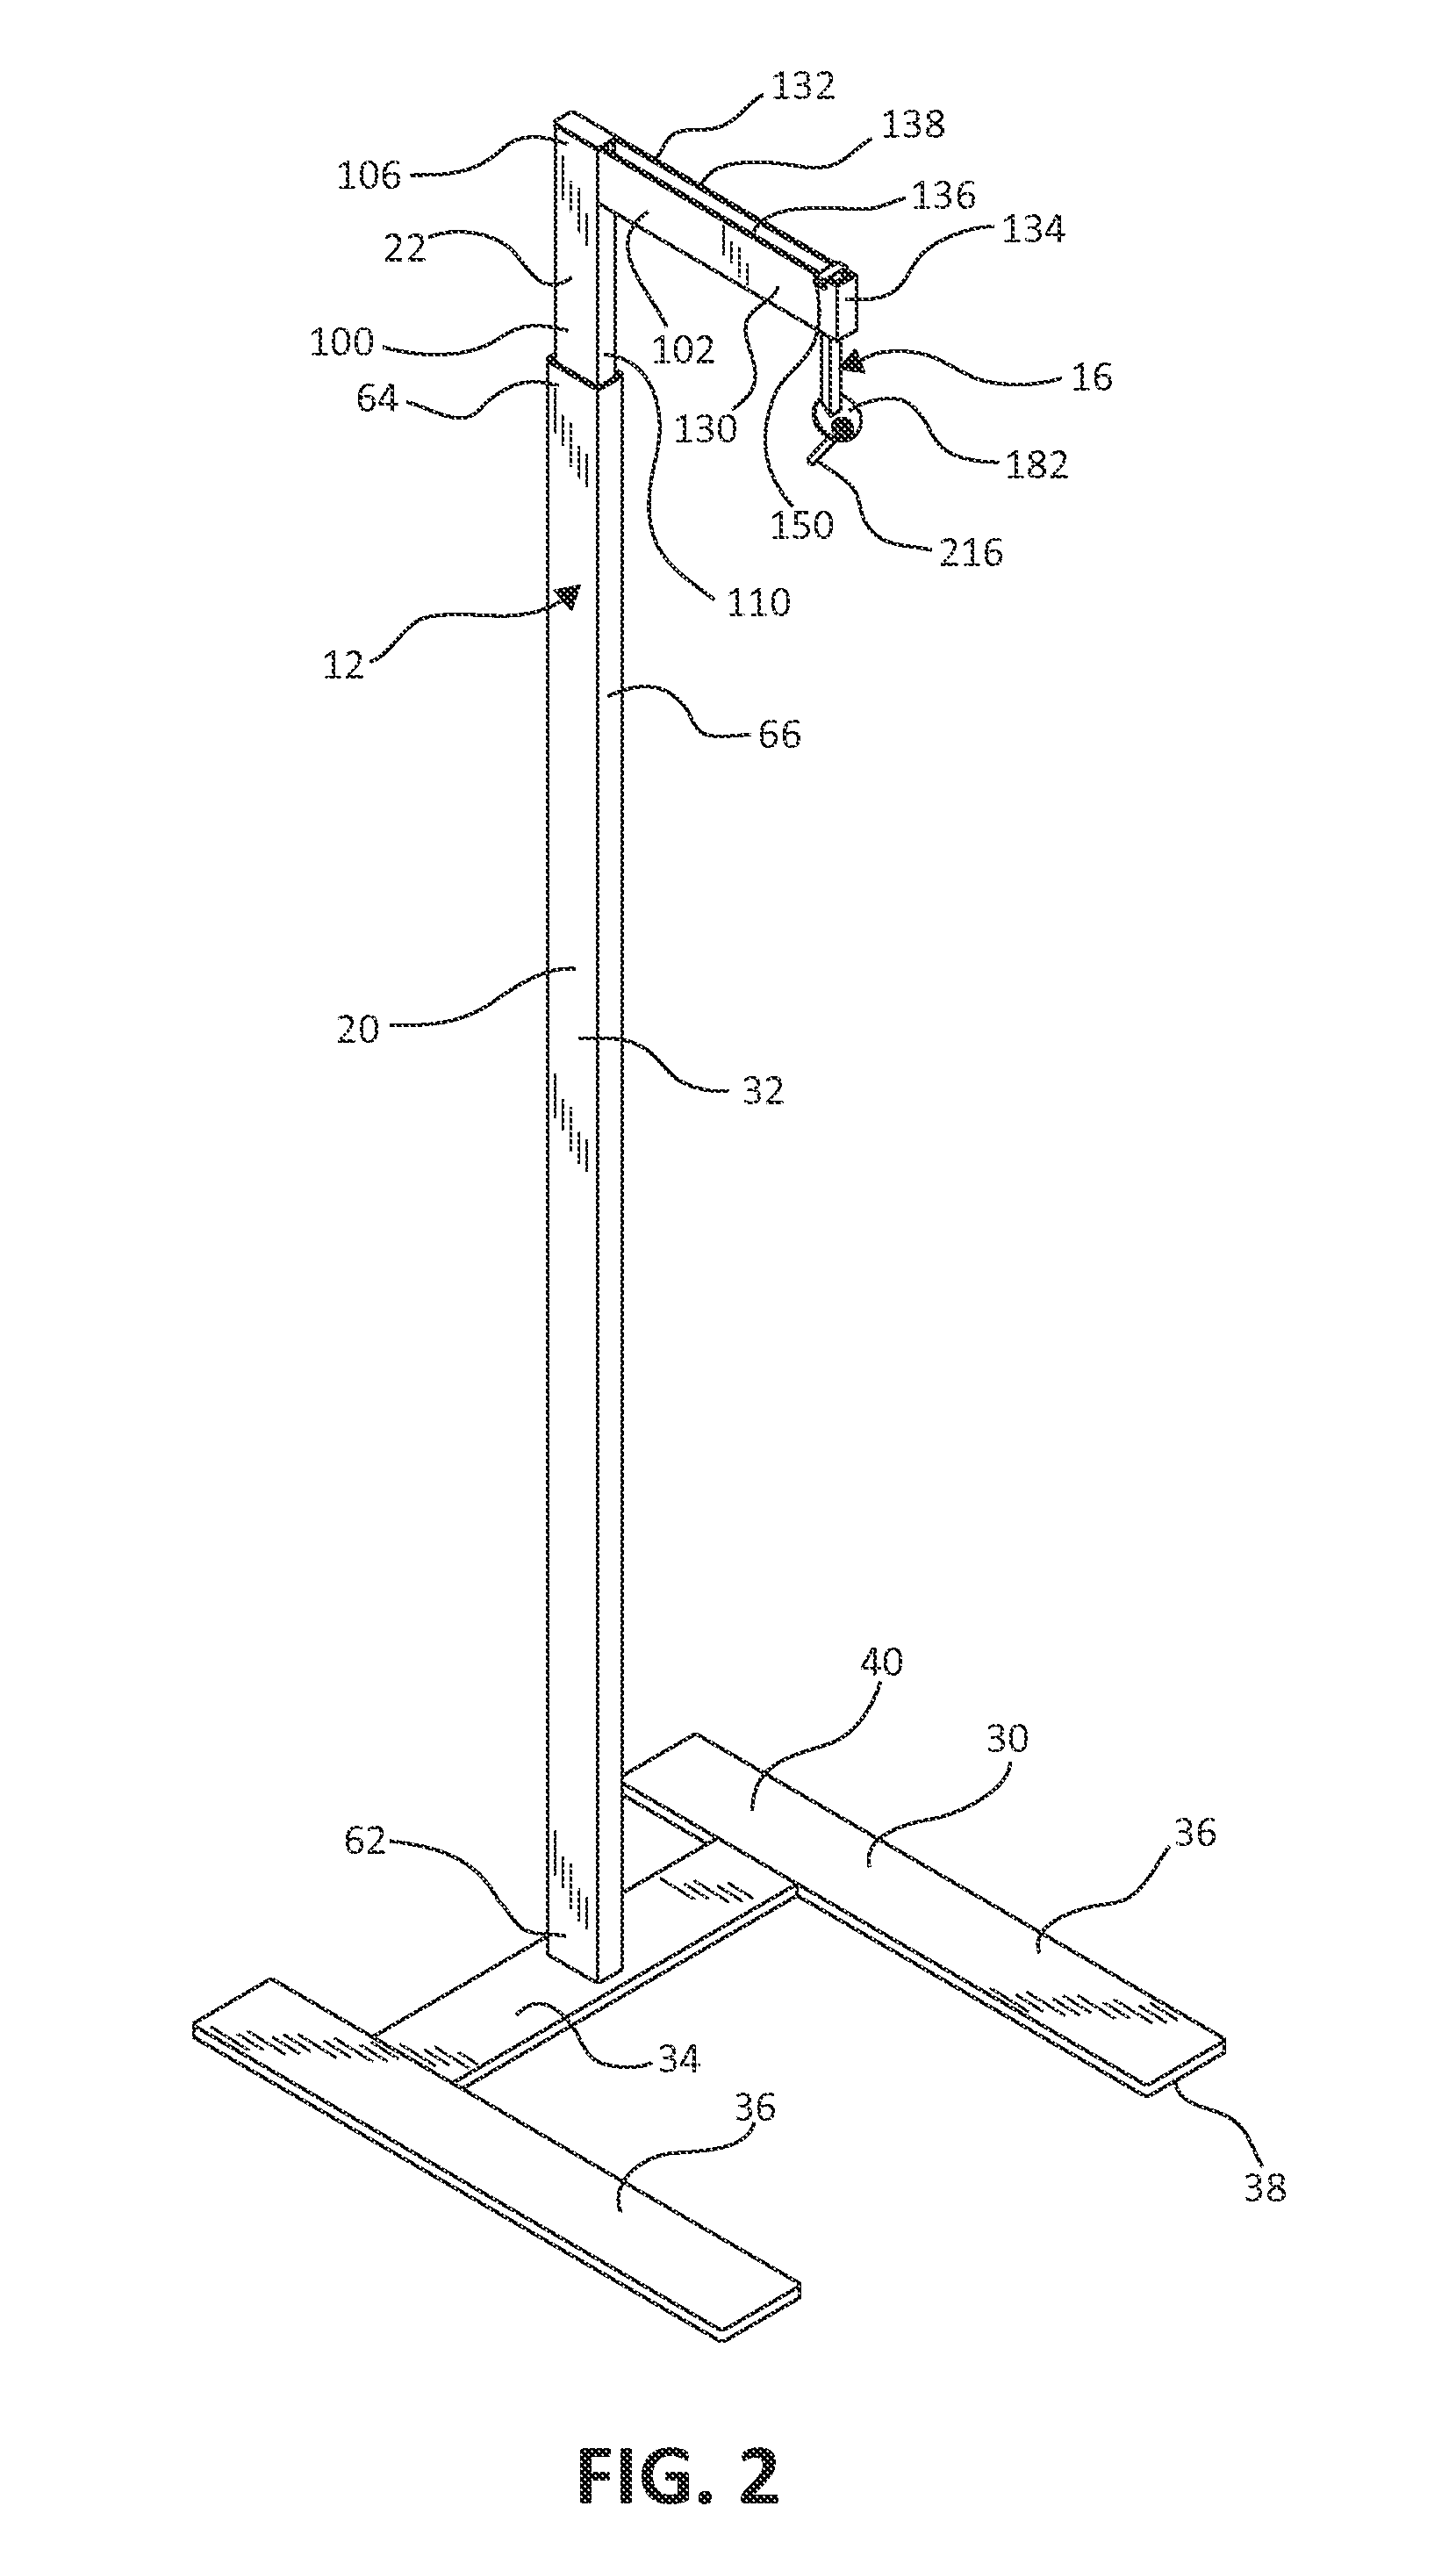 Display system with suspended merchandise support